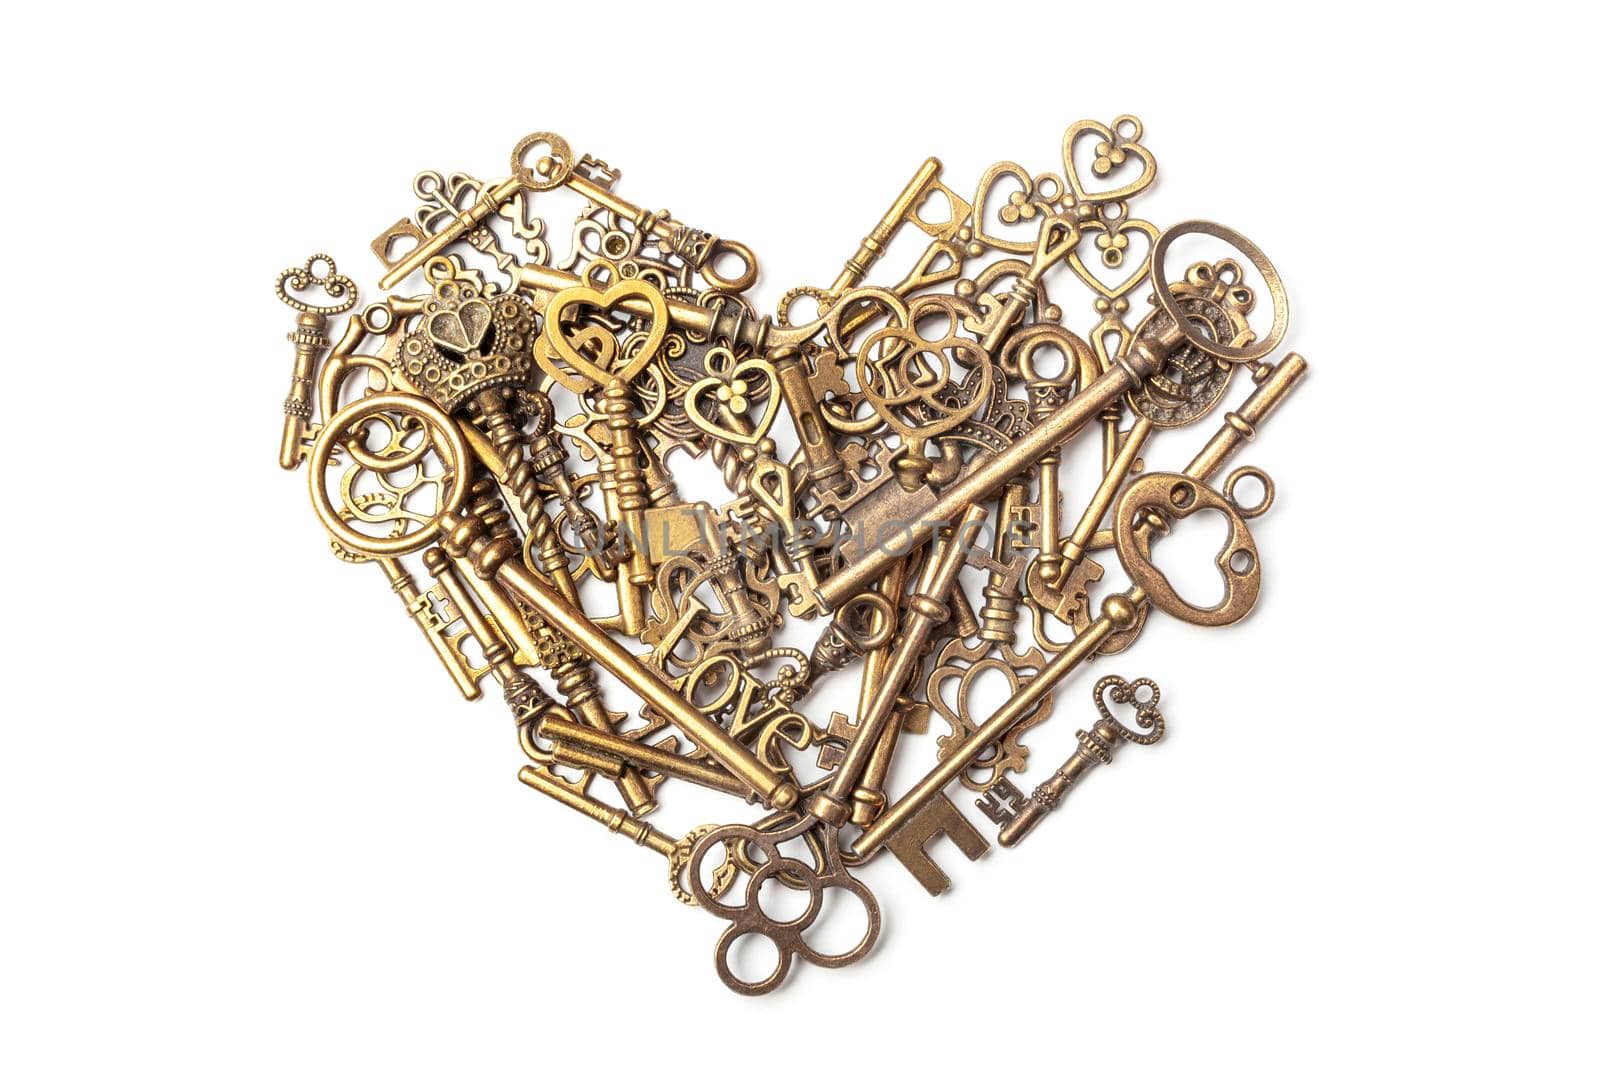 Old, vintage keys in the shape of a heart isolated on white bacground